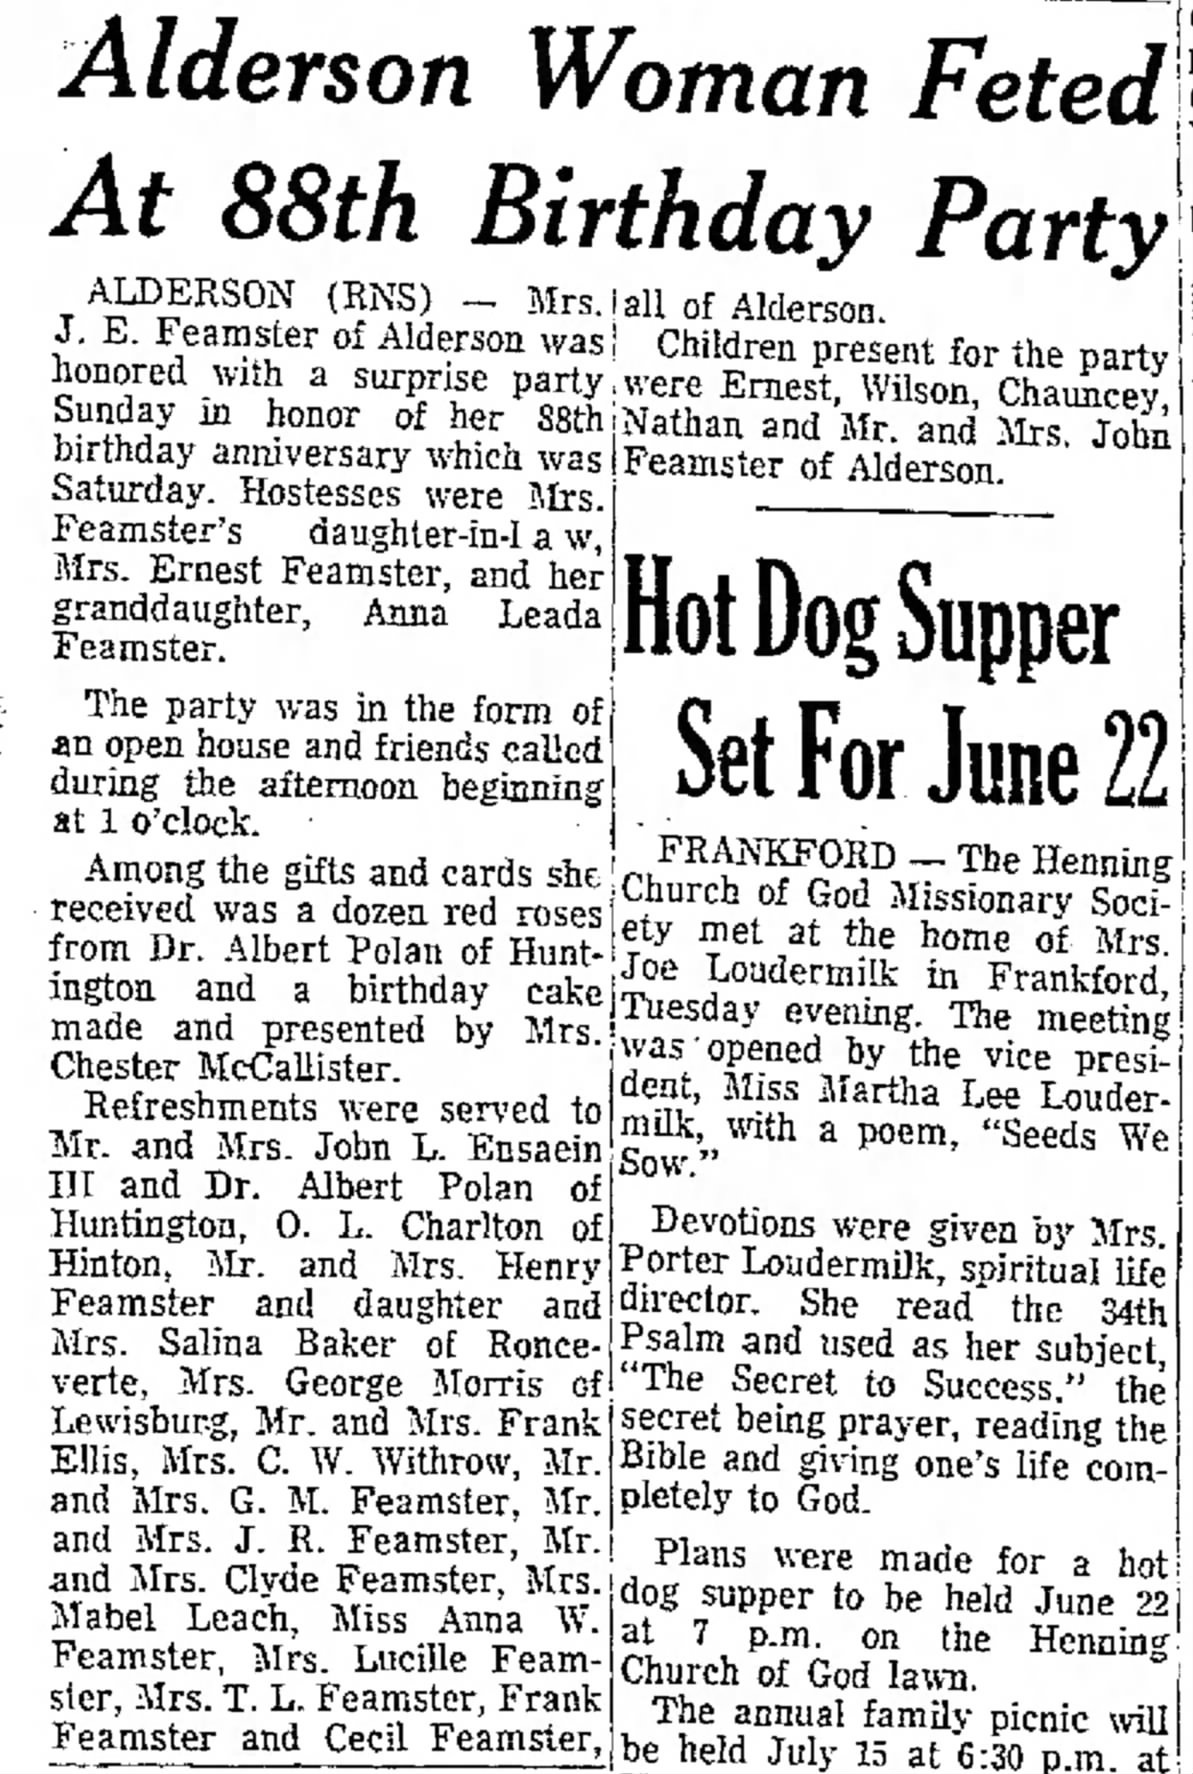 A newspaper article about J.E. Feamster's 88th birthday, attended by my grandfather, father, and mother. 